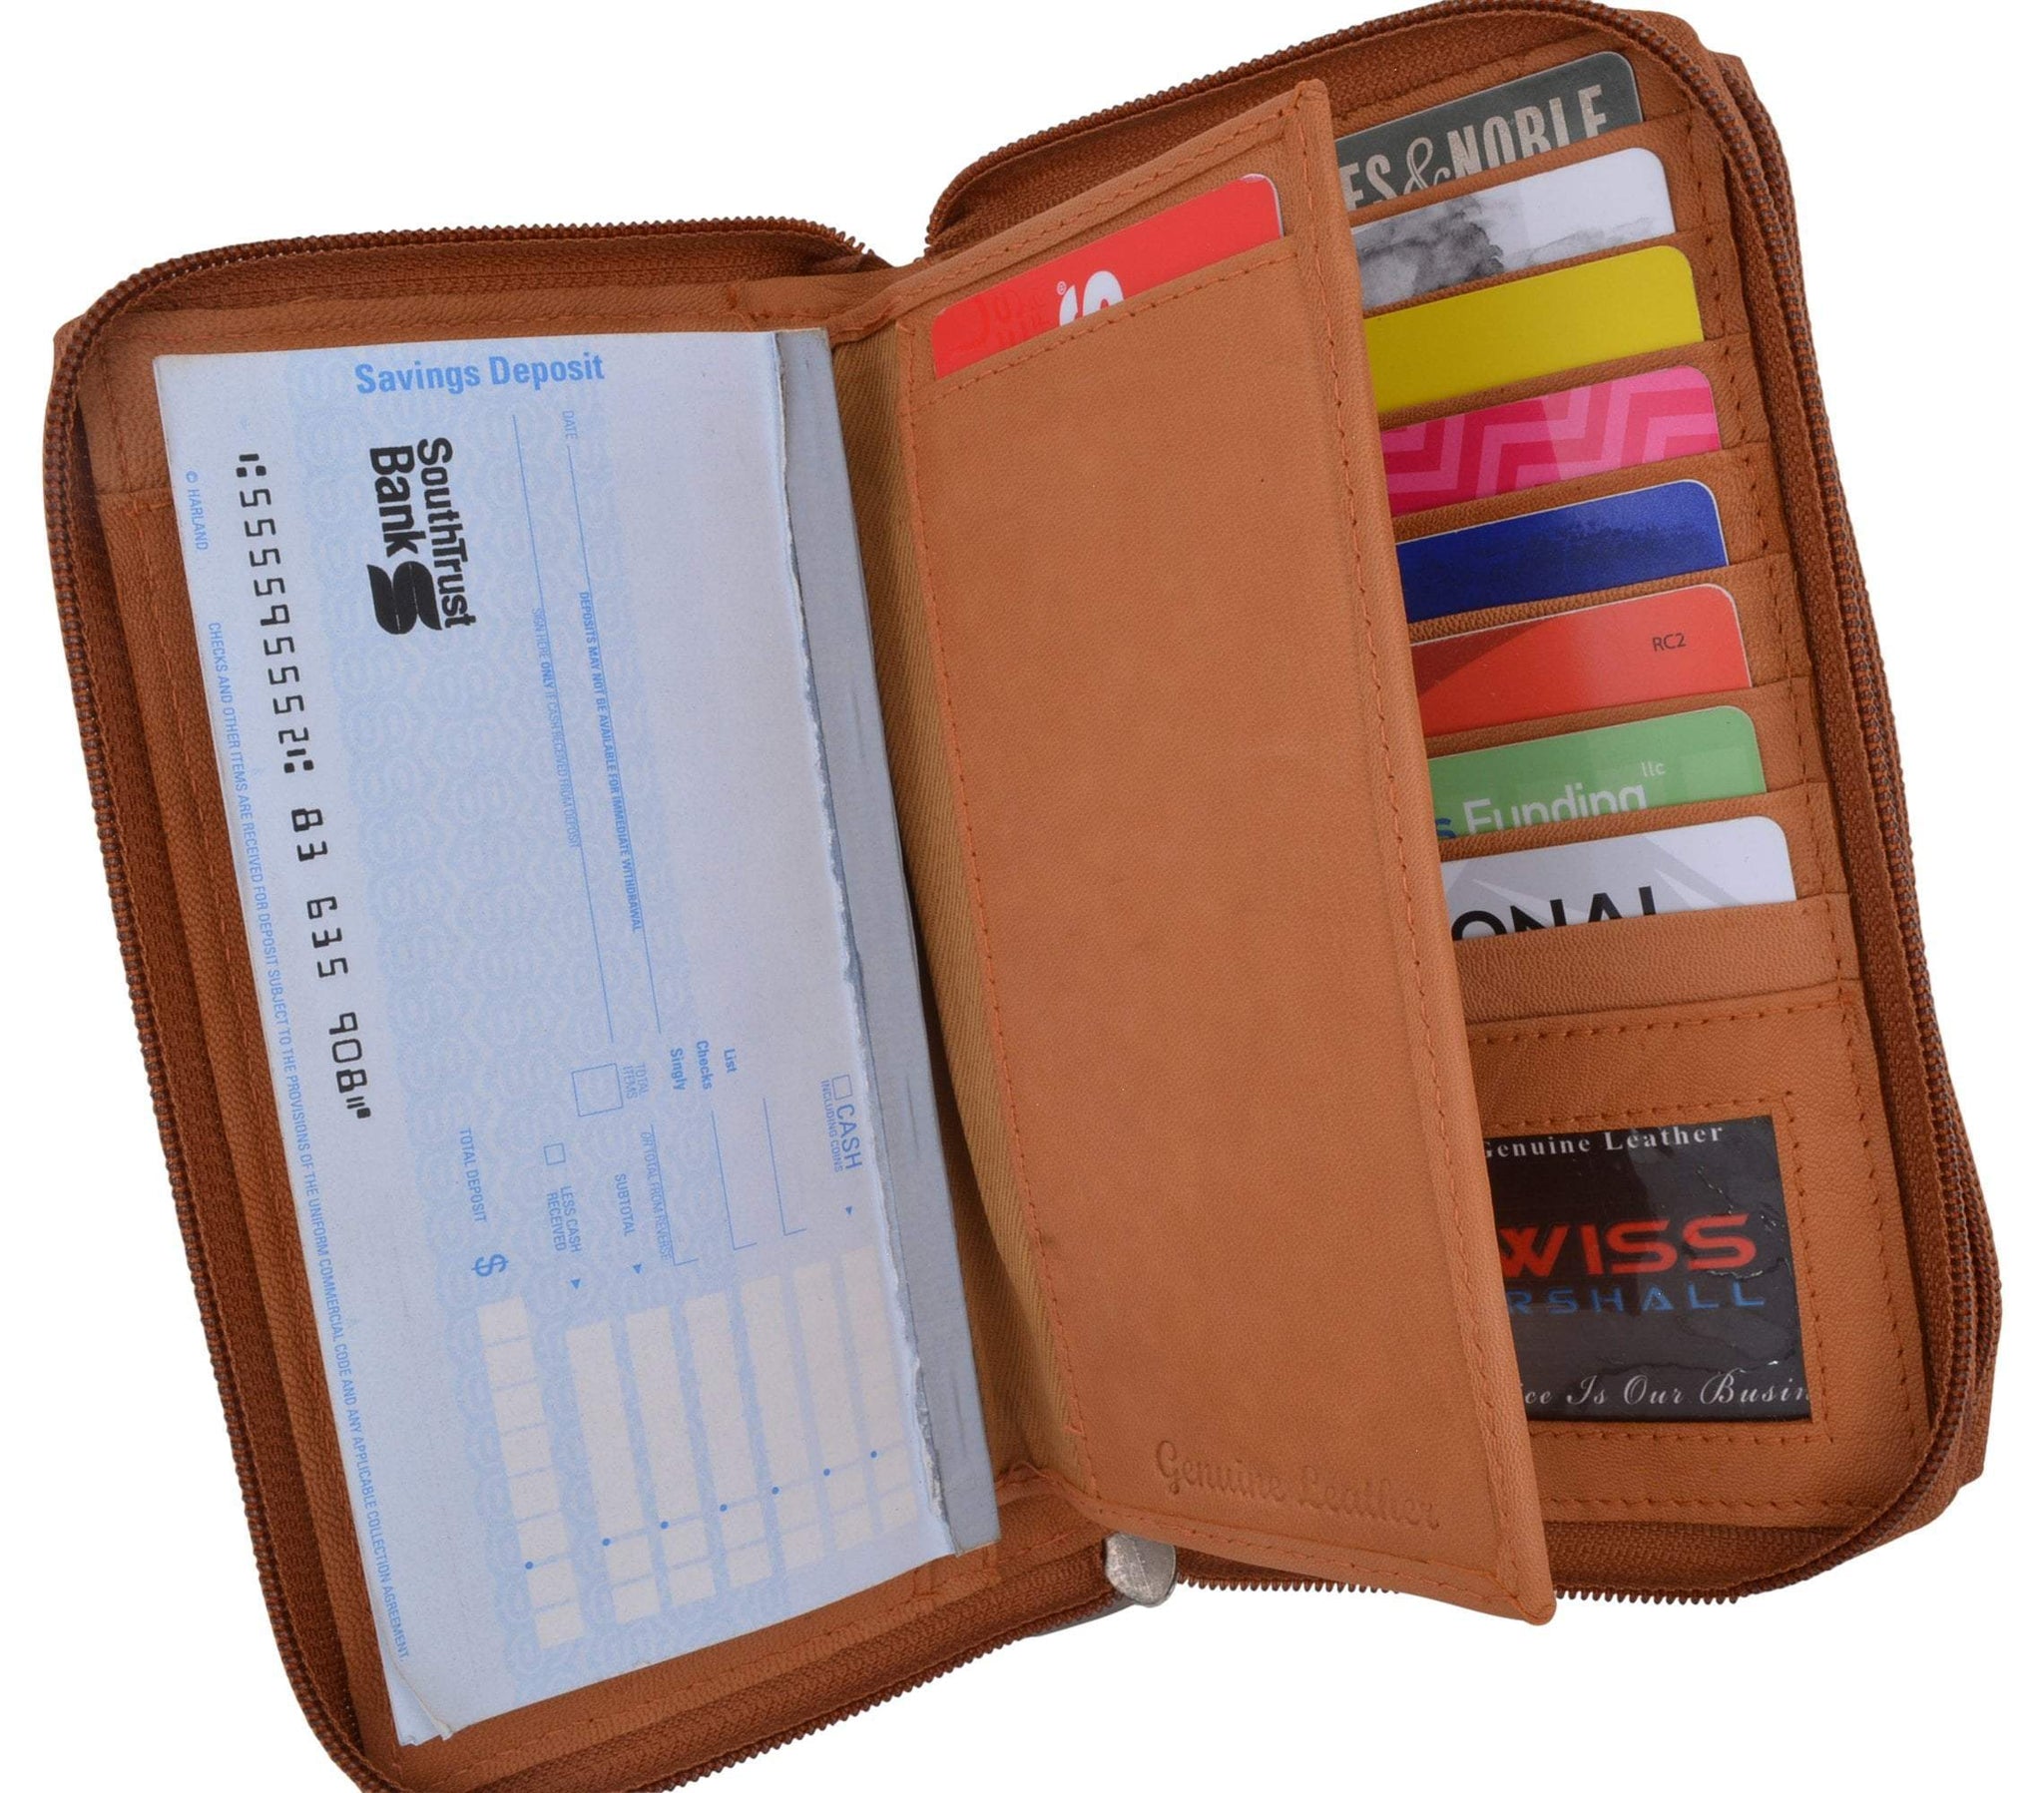 Women's Leather Card Holders